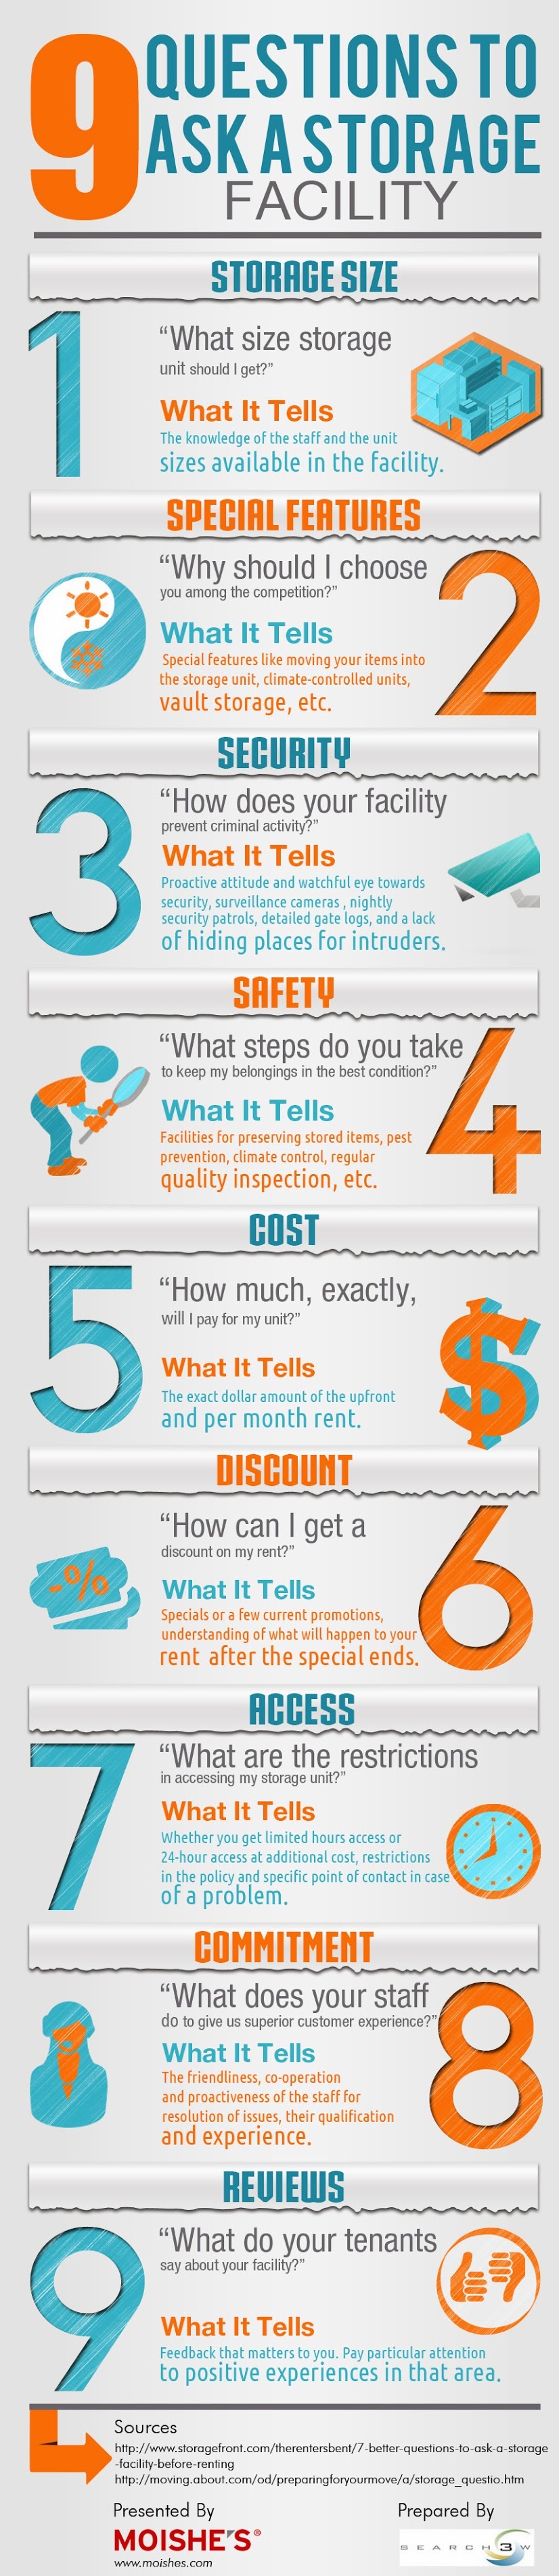 Infographic: 9 Questions To Ask A Storage Facility